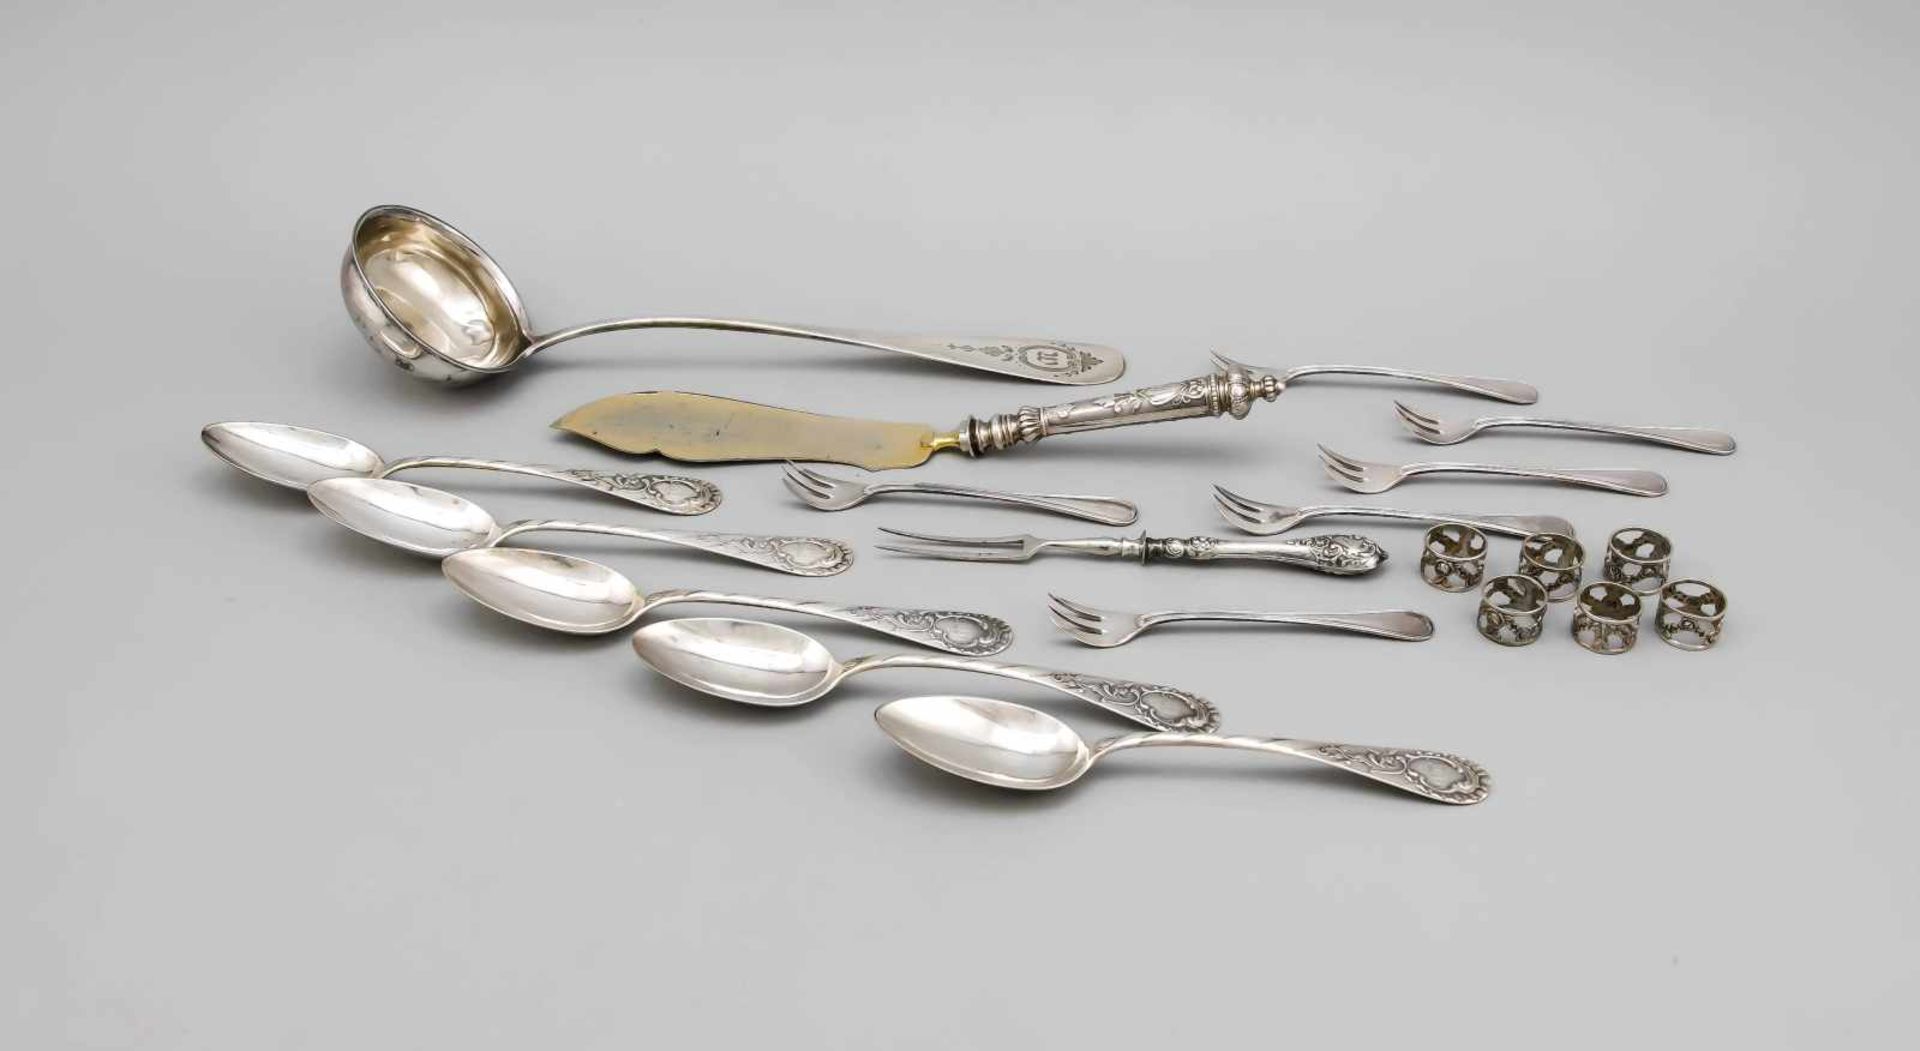 Compilation of 14 pieces cutlery and 6 napkin rings, 20th century, silver different